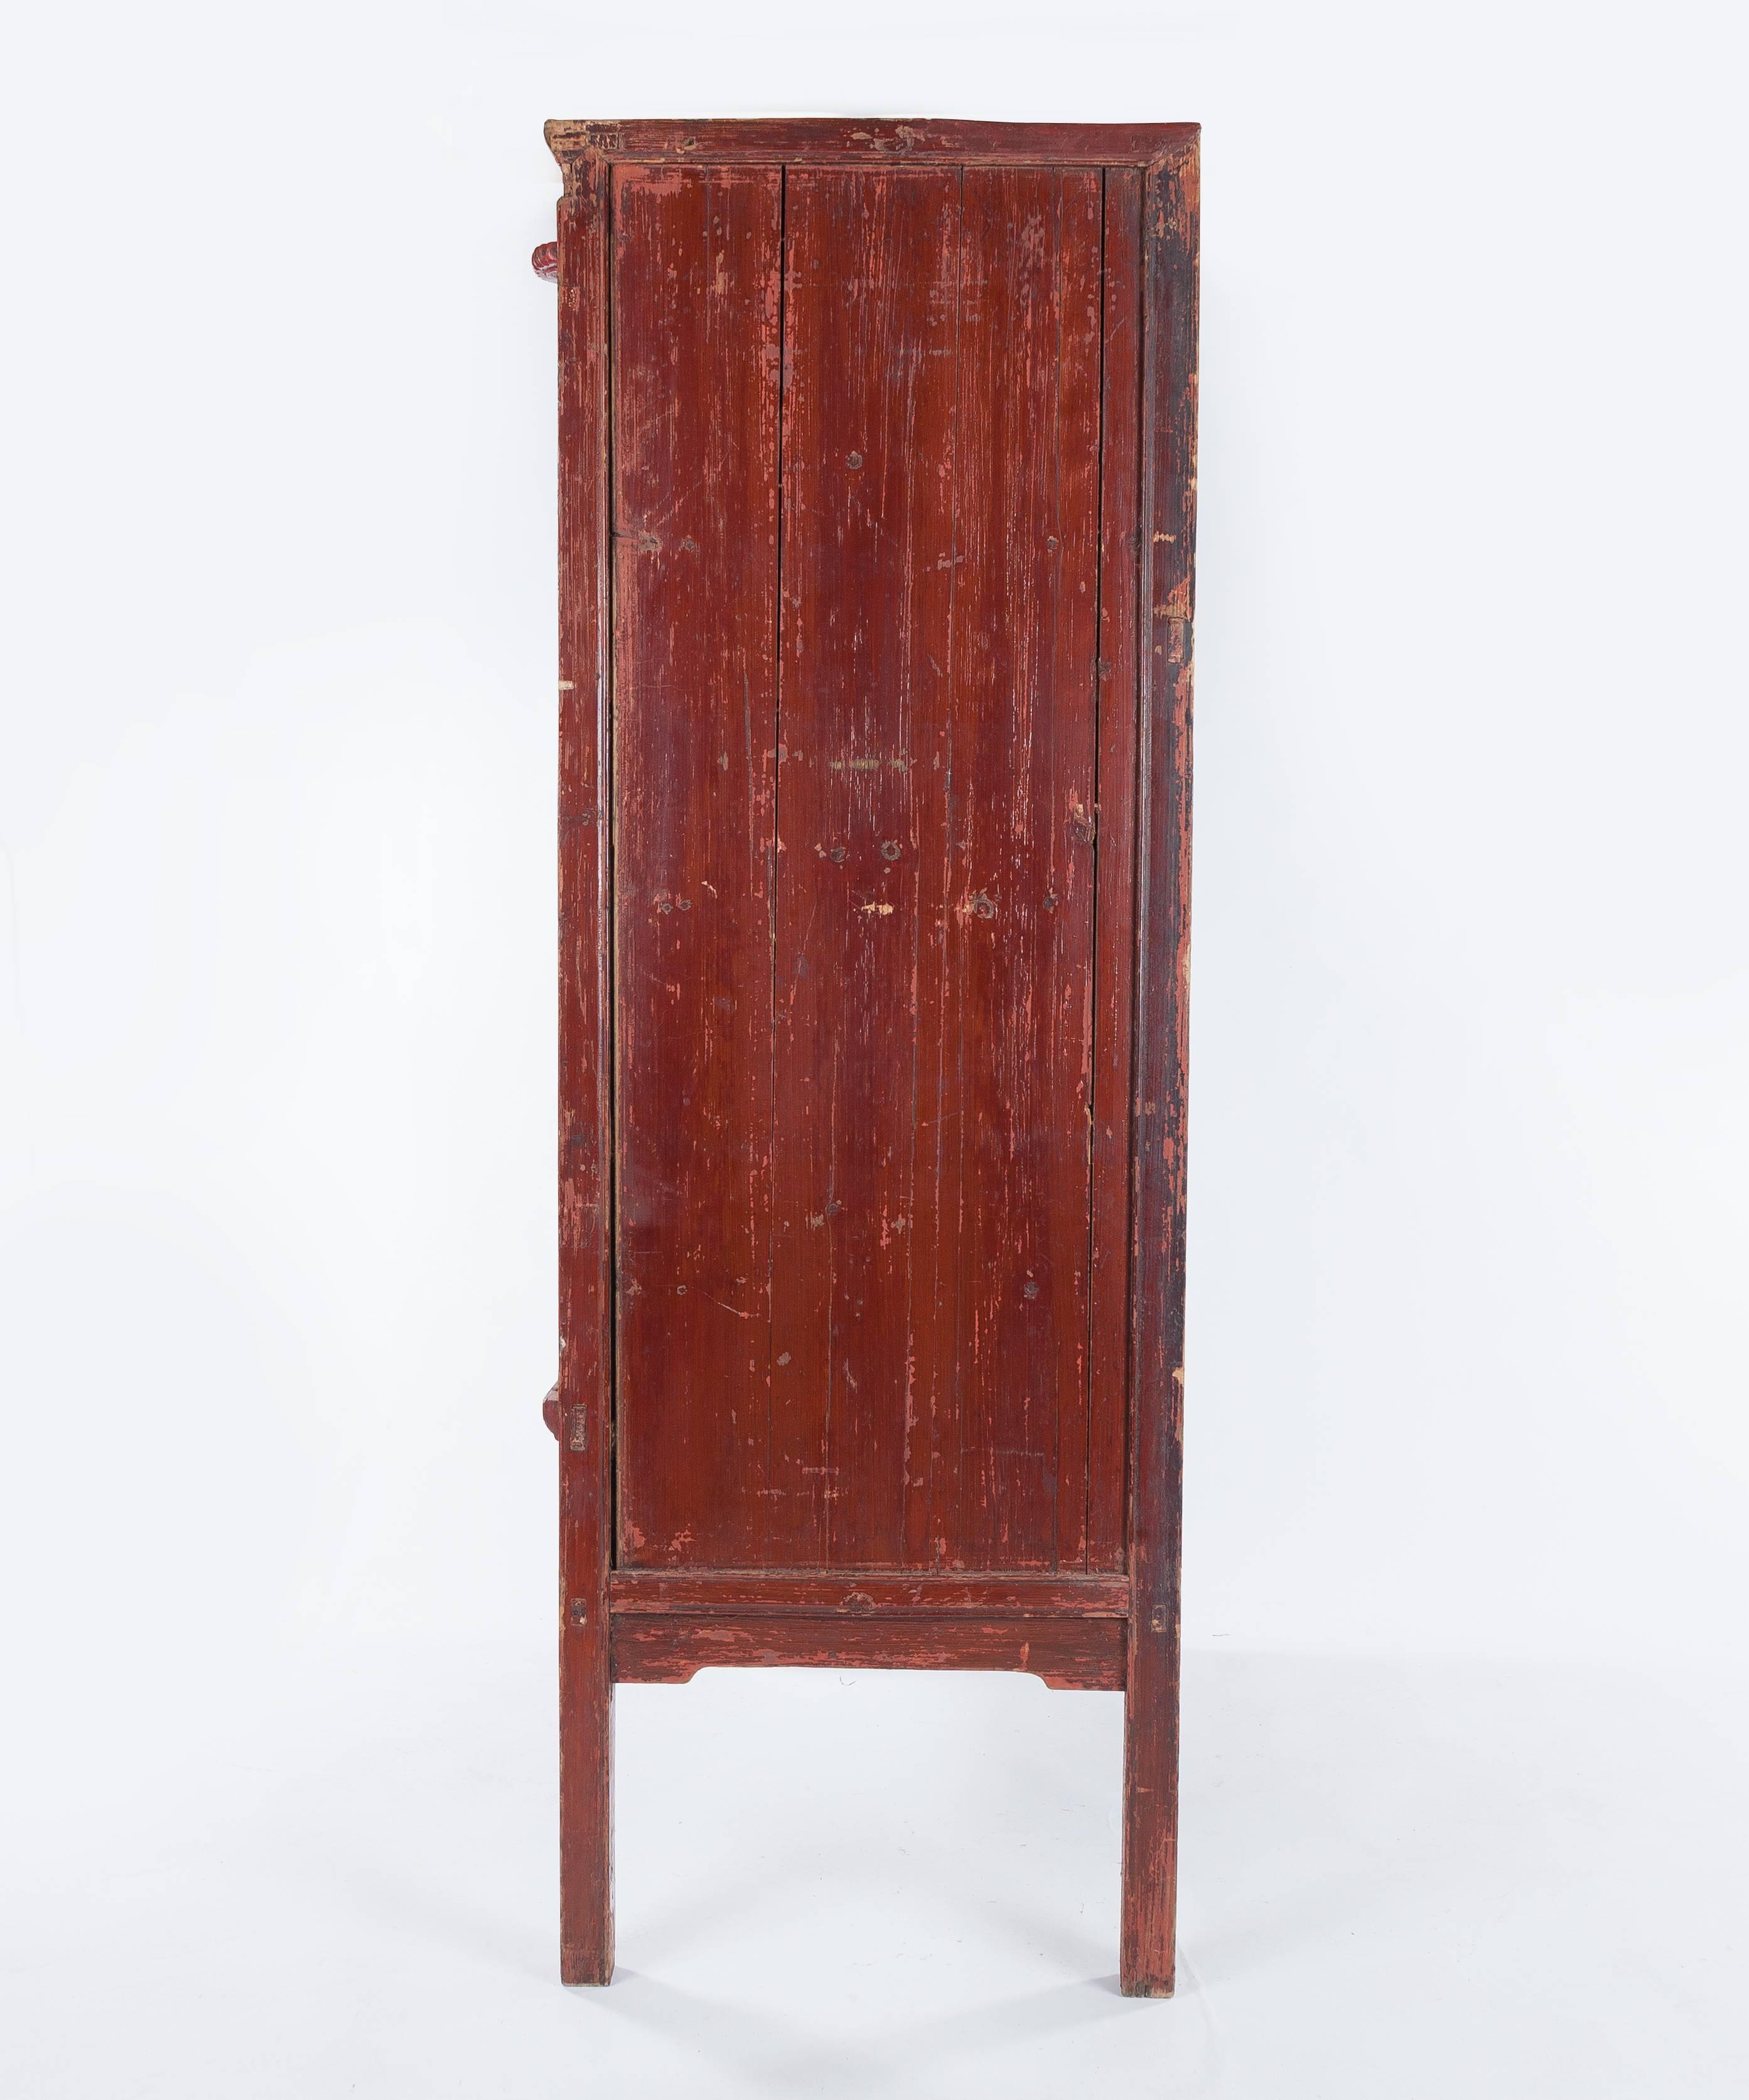 Pair of Antique Red Lacquer Ming-Style Chinese Wardrobe or Armoire Cabinets For Sale 2